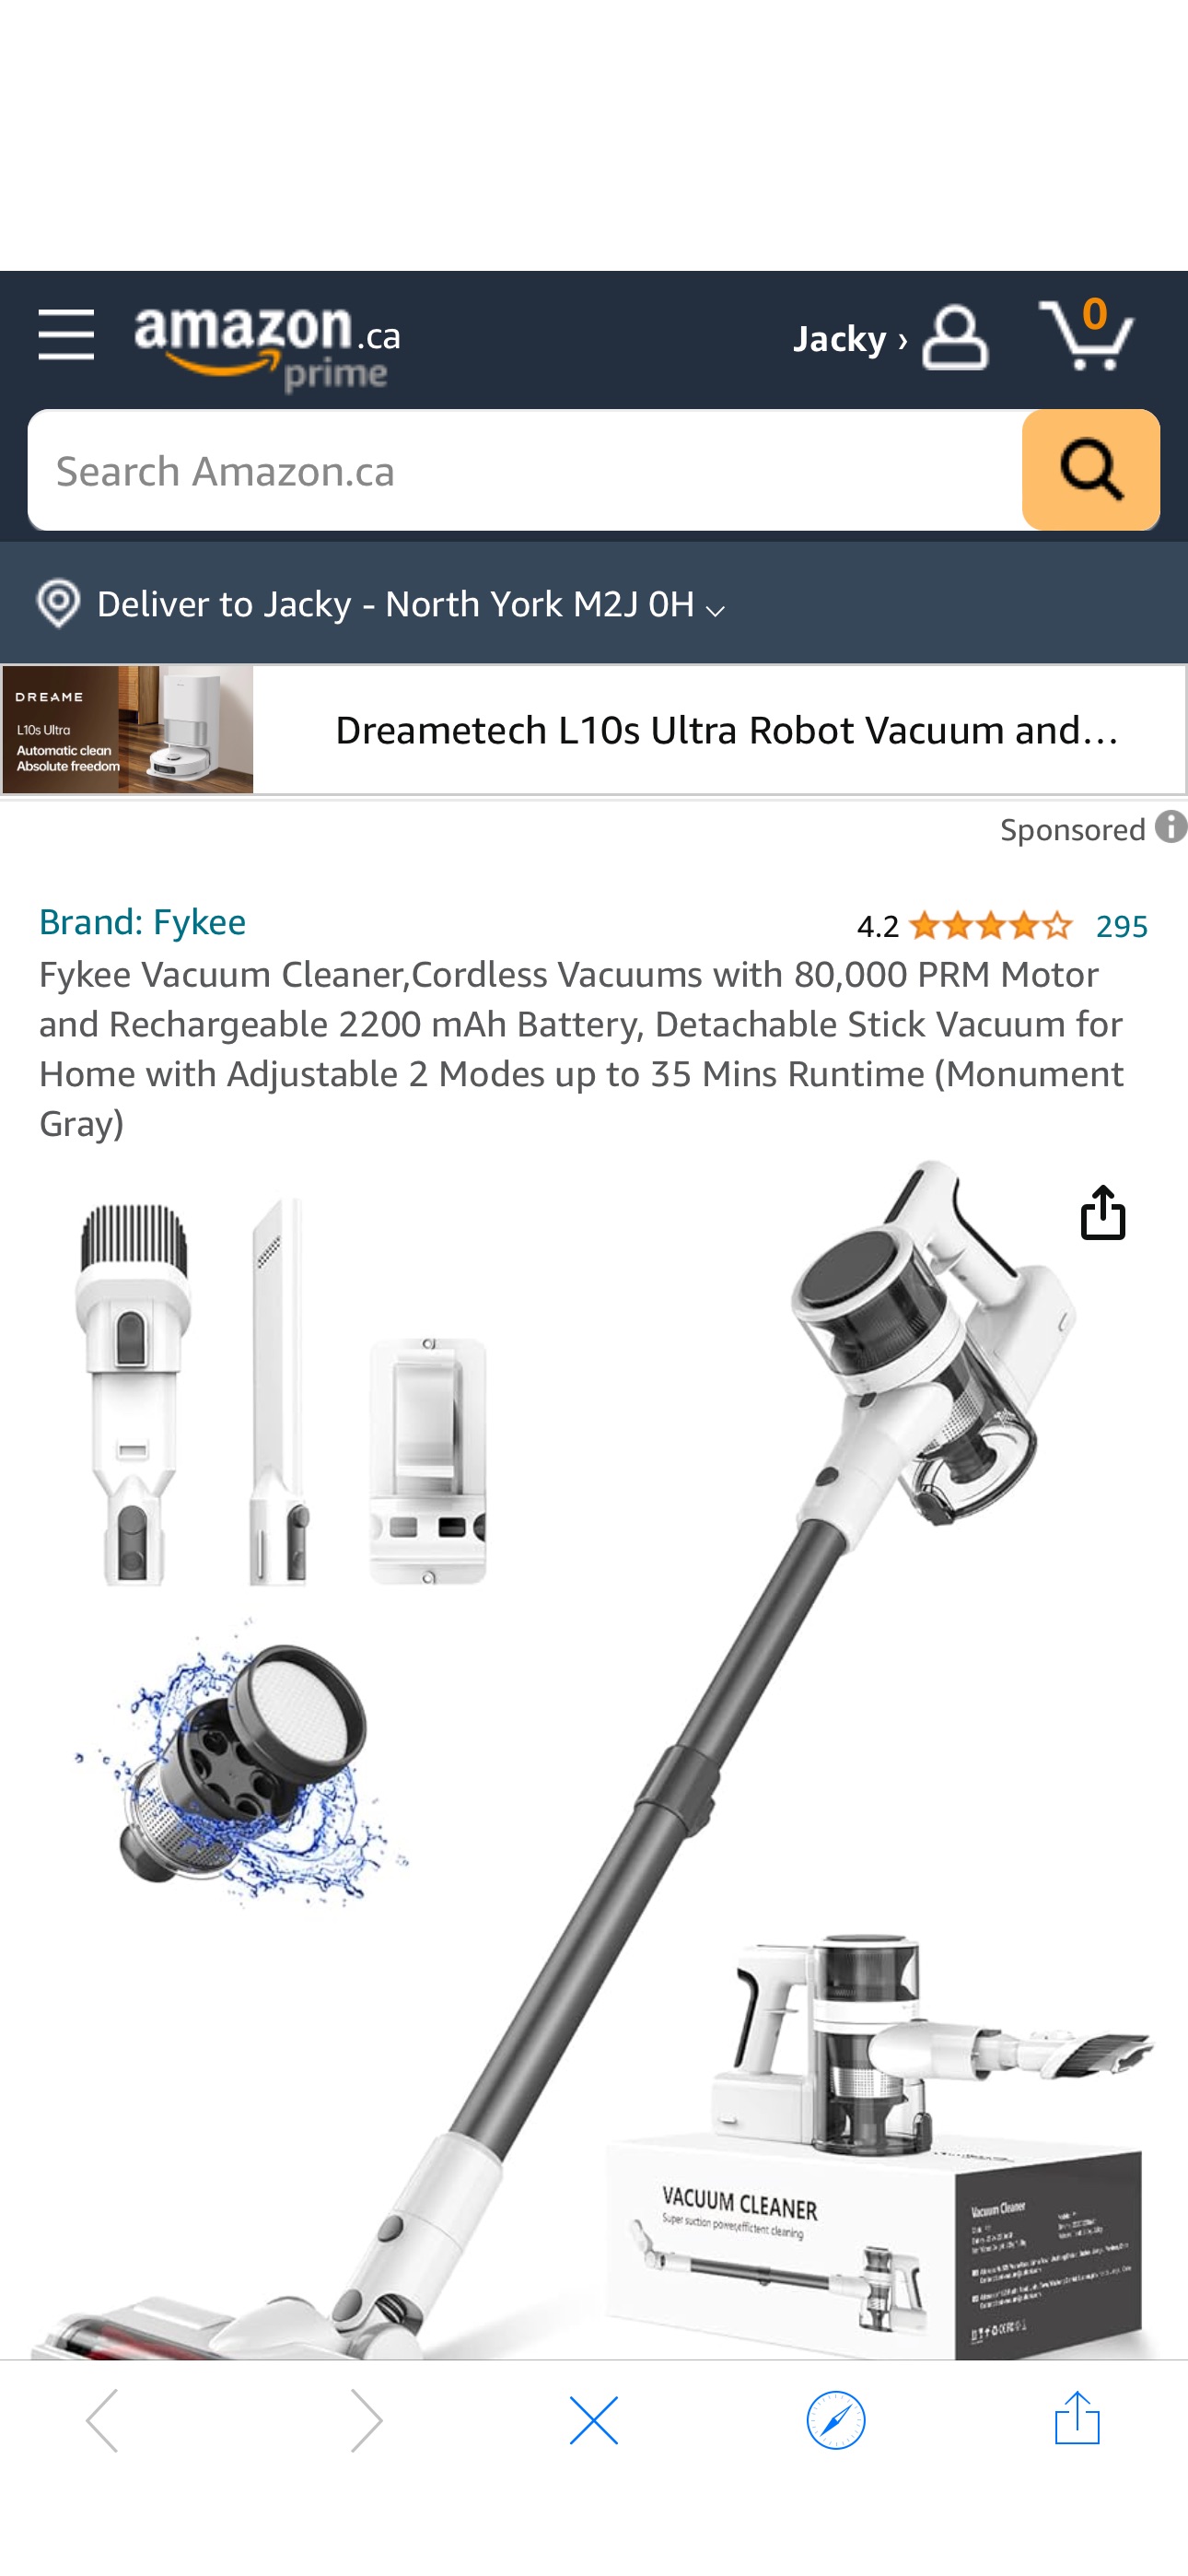 Fykee Vacuum Cleaner,Cordless Vacuums with 80,000 PRM Motor and Rechargeable 2200 mAh Battery, Detachable Stick Vacuum for Home with Adjustable 2 Modes up to 35 Mins Runtime (Monument Gray) : Amazon.c